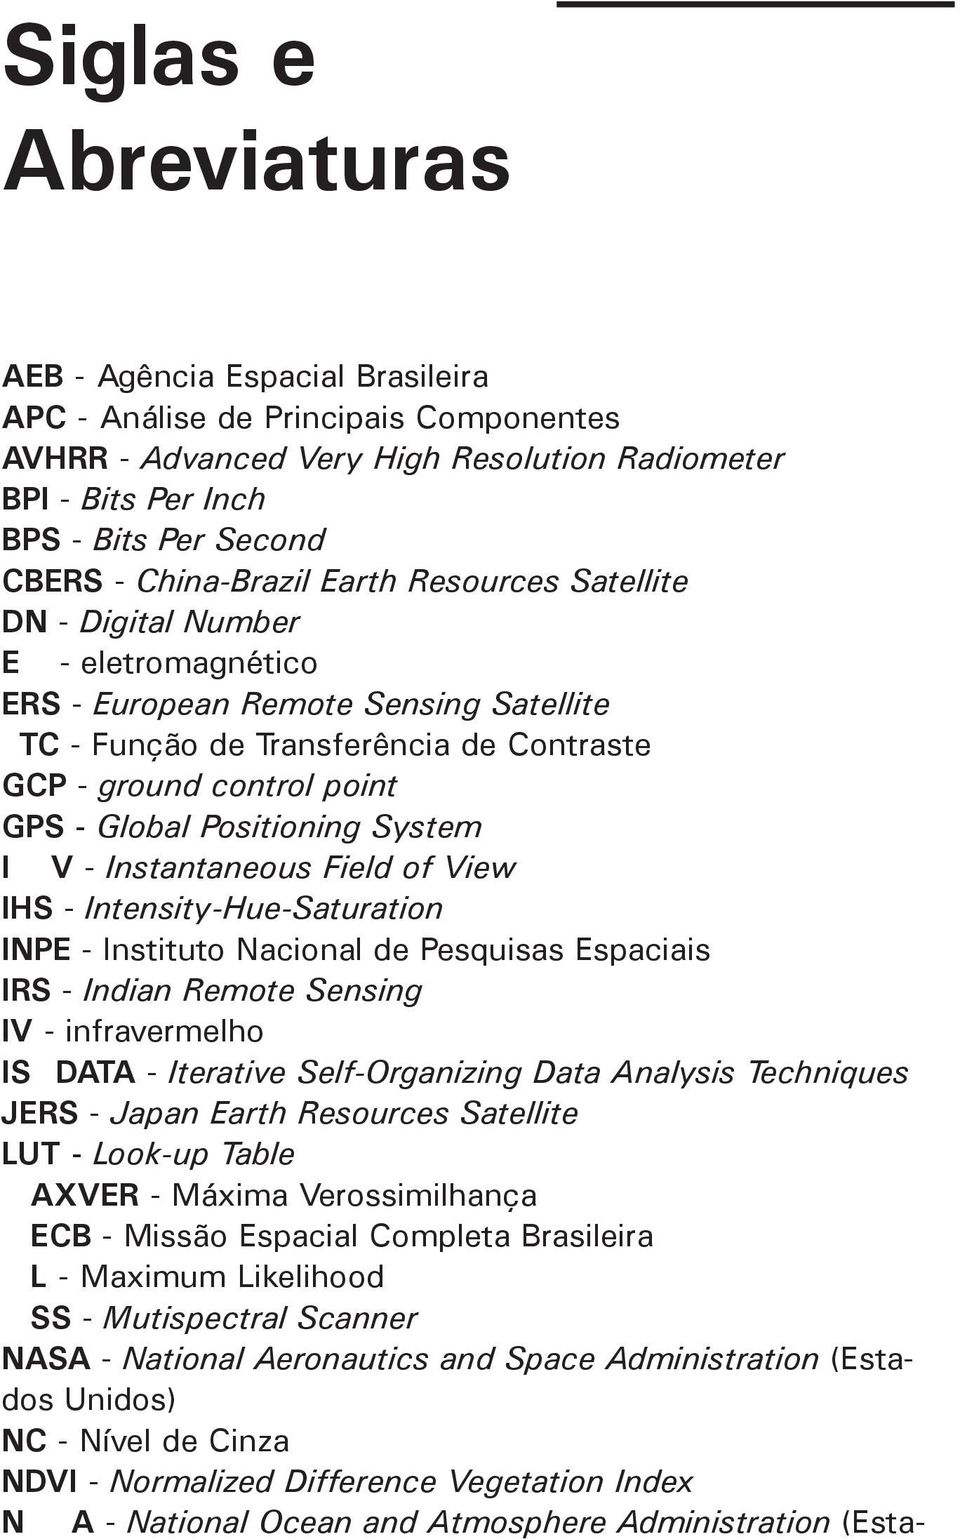 Global Positioning System IFOV - Instantaneous Field of View IHS - Intensity-Hue-Saturation INPE - Instituto Nacional de Pesquisas Espaciais IRS - Indian Remote Sensing IV - infravermelho ISODATA -